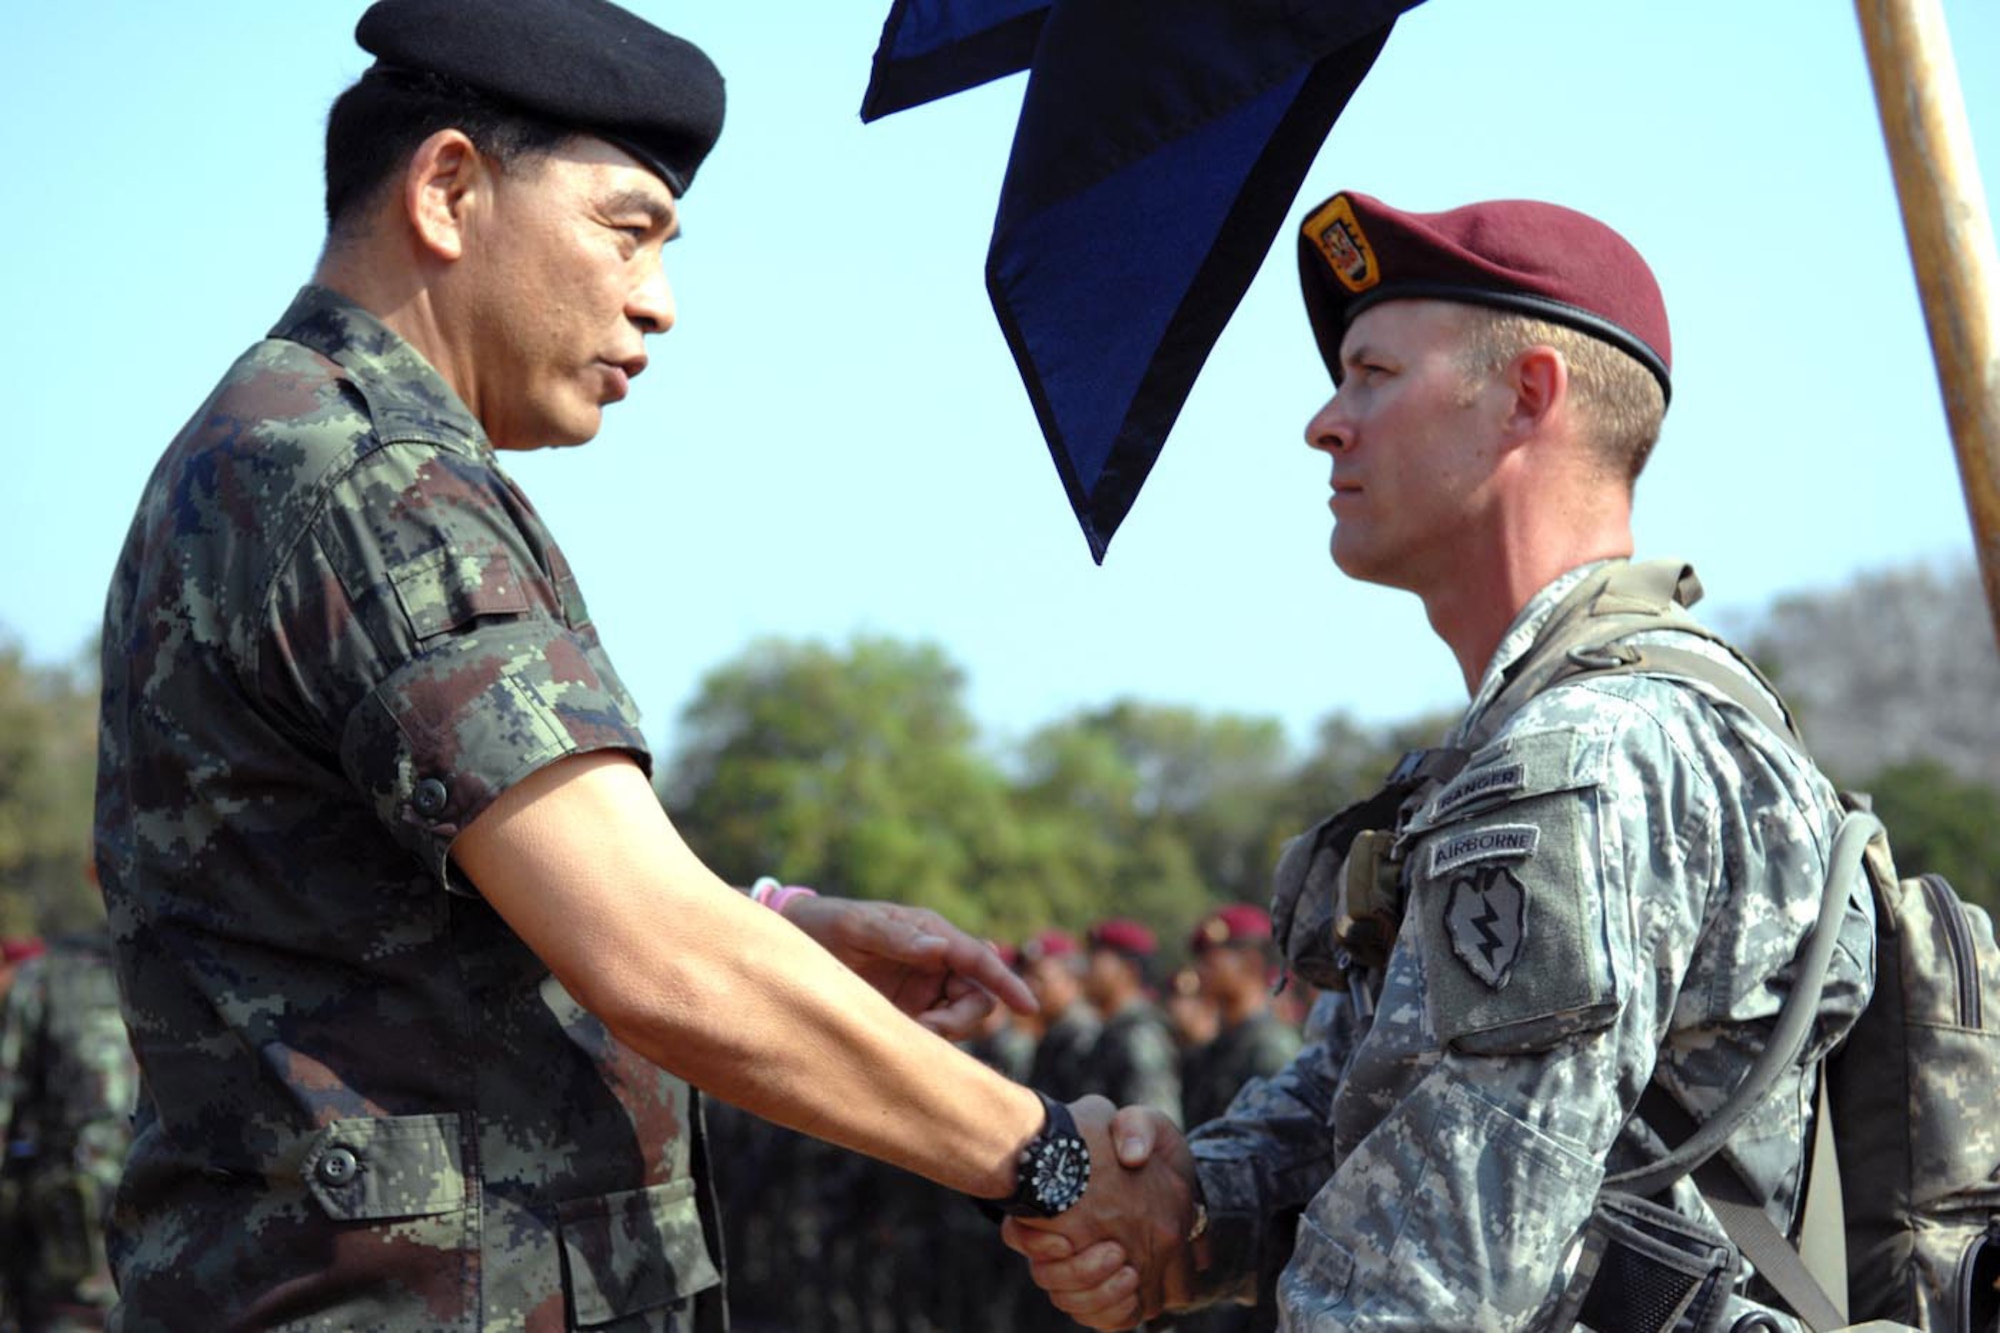 Maj. Gen. Kampanart Ruthdit, commanding general of the Royal Thai Army’s 1st Division, shakes the hand of 1st Sgt. Richard C. Wiley,
A Company, 3rd Battalion, 509th Infantry Regiment (Airborne), while inspecting Thai and U.S. troops at a Feb. 17 closing ceremony for
Exercise Cobra Gold 2011. (U.S. Army photo/Staff Sgt. Matthew E. Winstead)